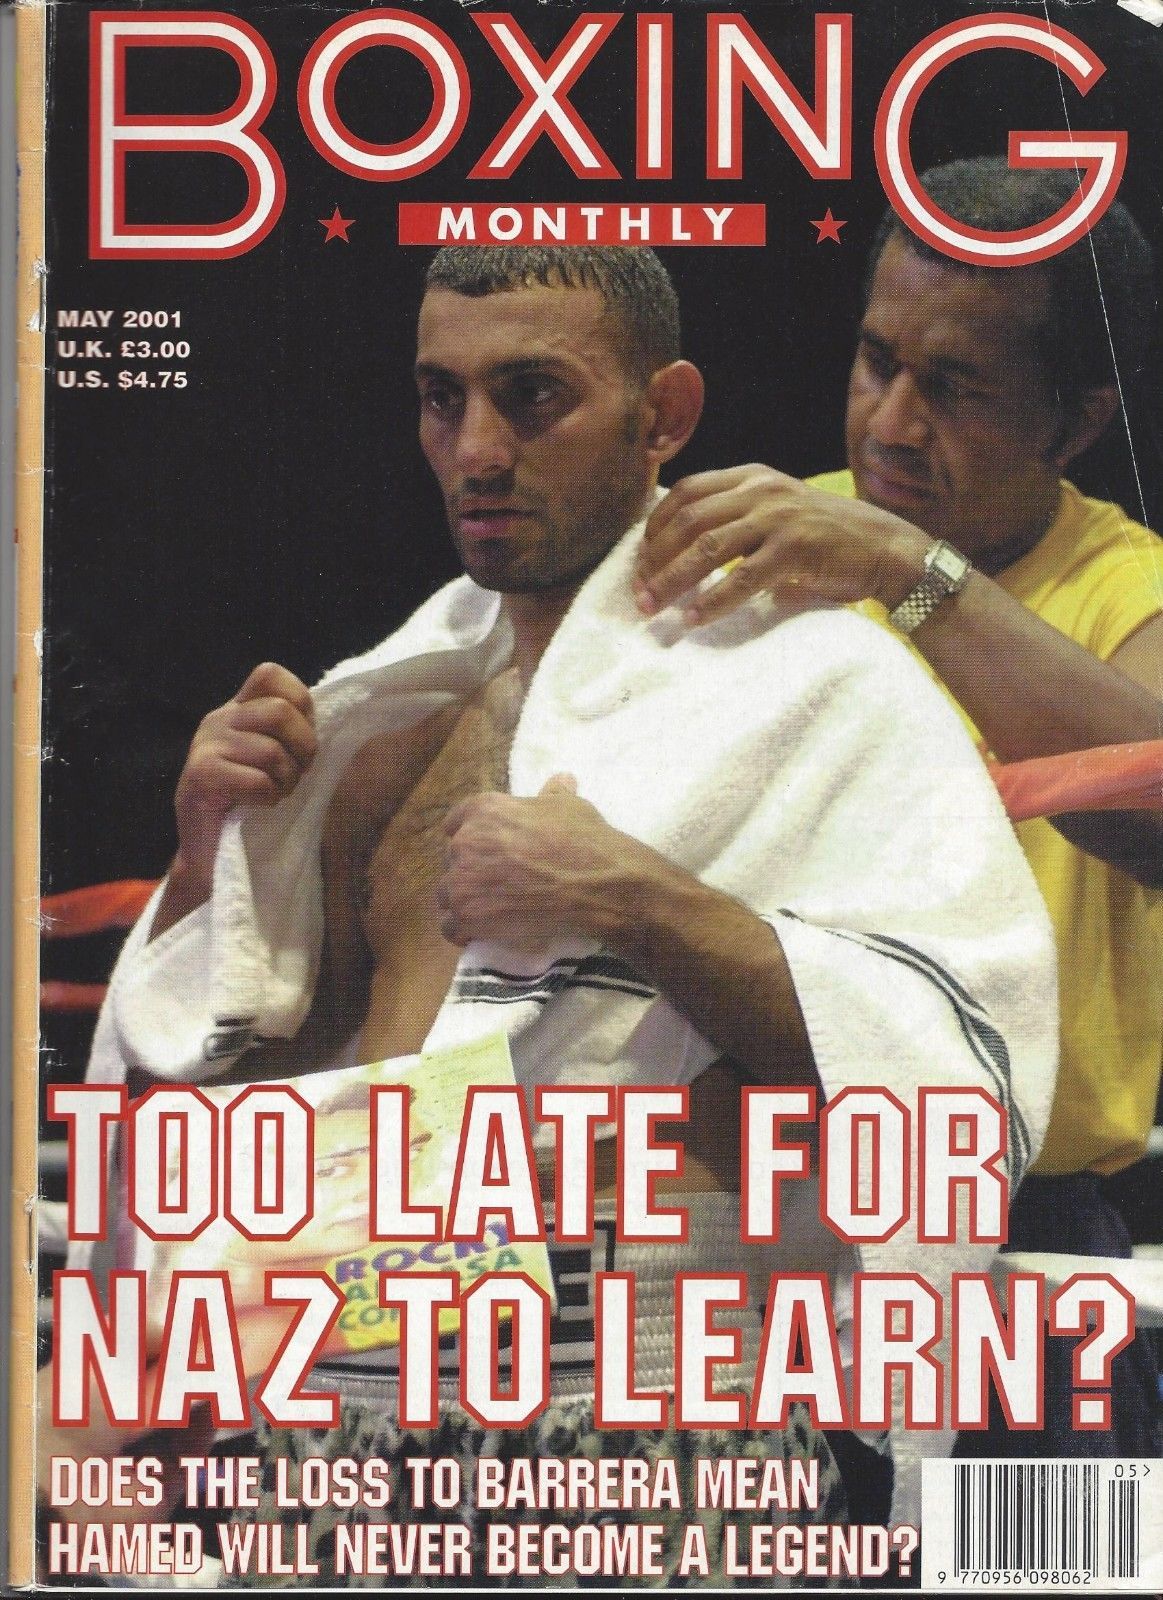 PRINCE NASEEN HAMED BOXING MONTHLY MAY 2001 MAGAZINE NO LABEL CREASE TOP RIGHT - $1.97